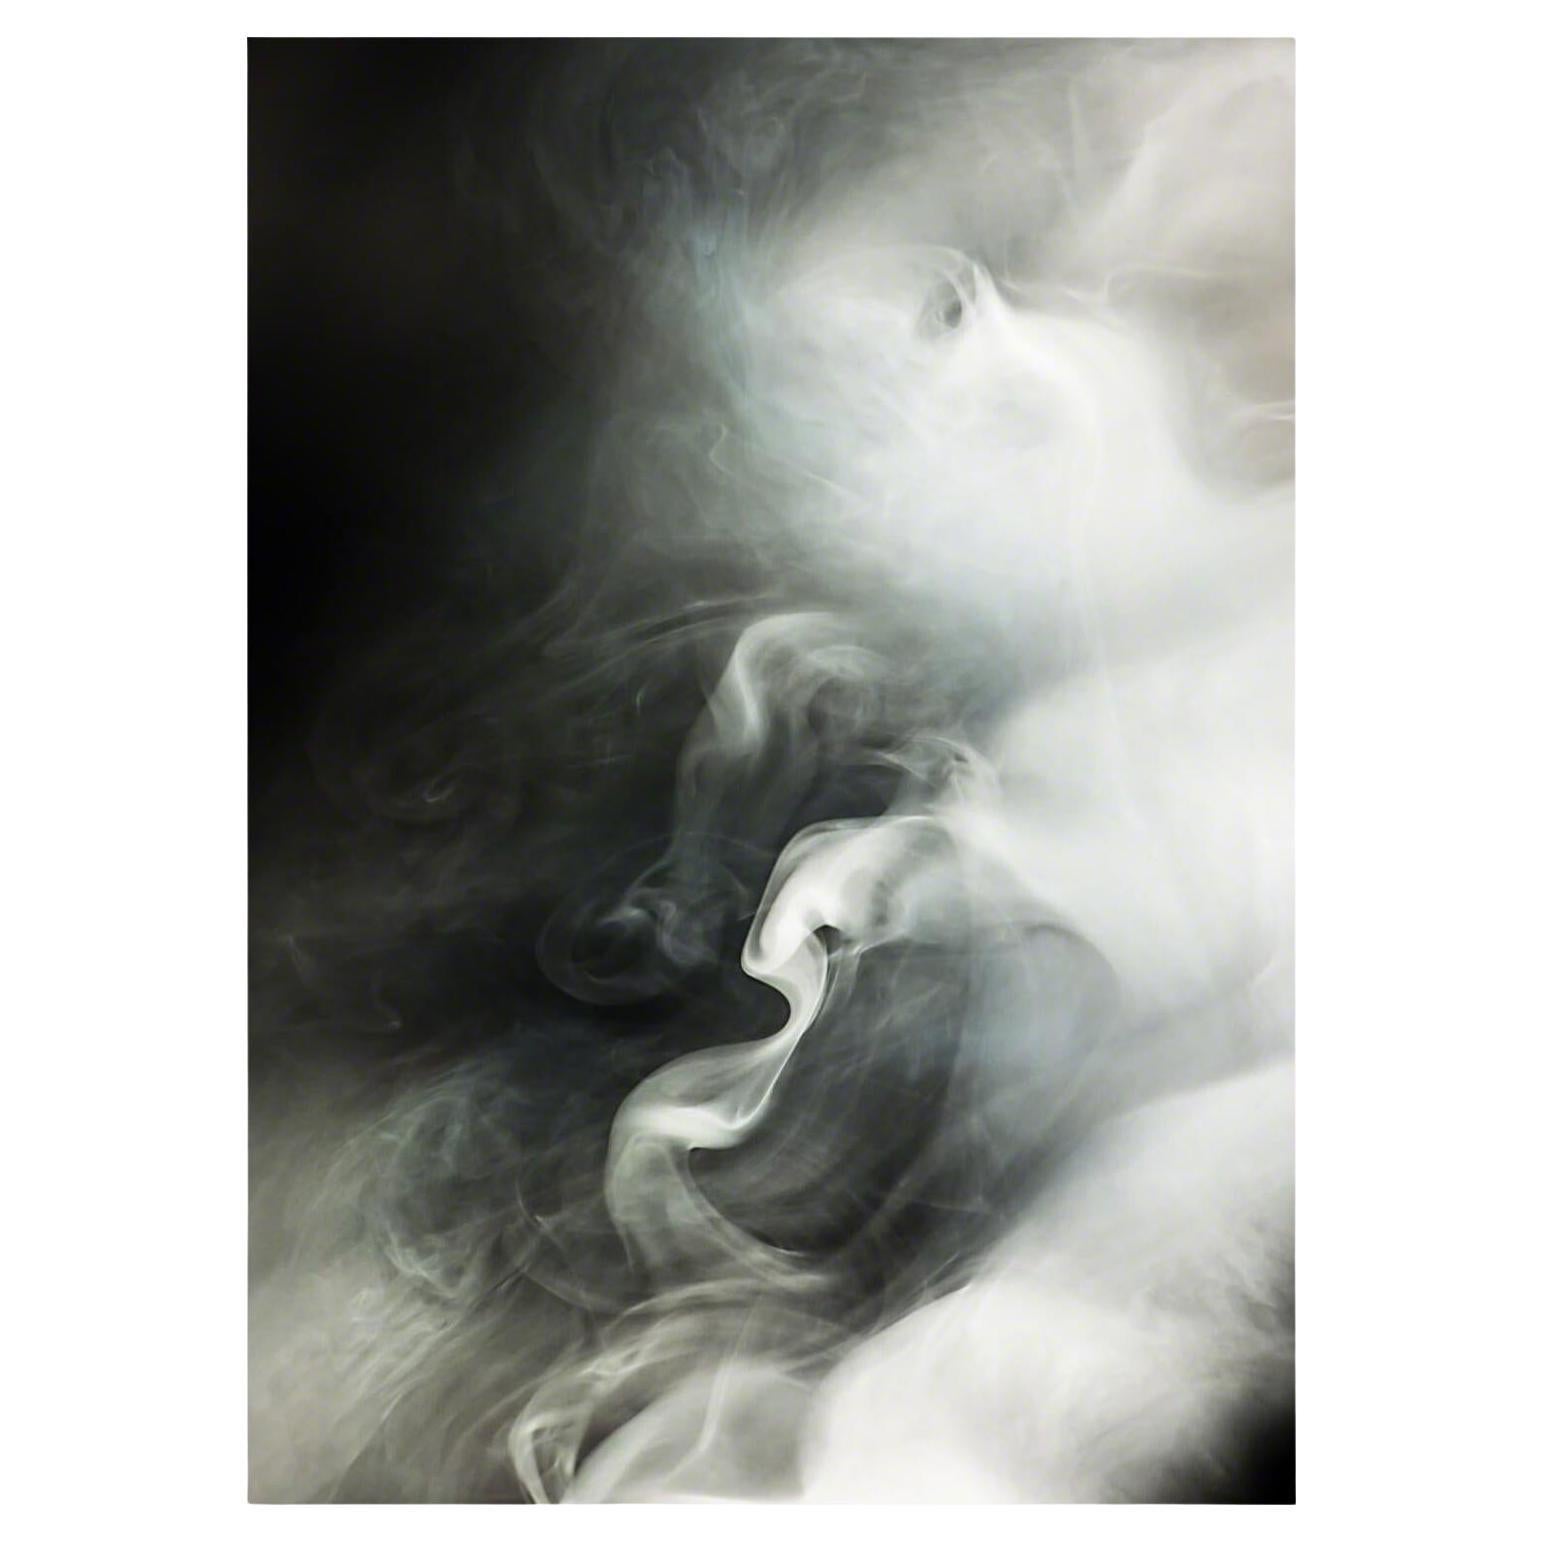 Daniele Albright, "Smoke and Mirrors 11", Art, 2014 For Sale